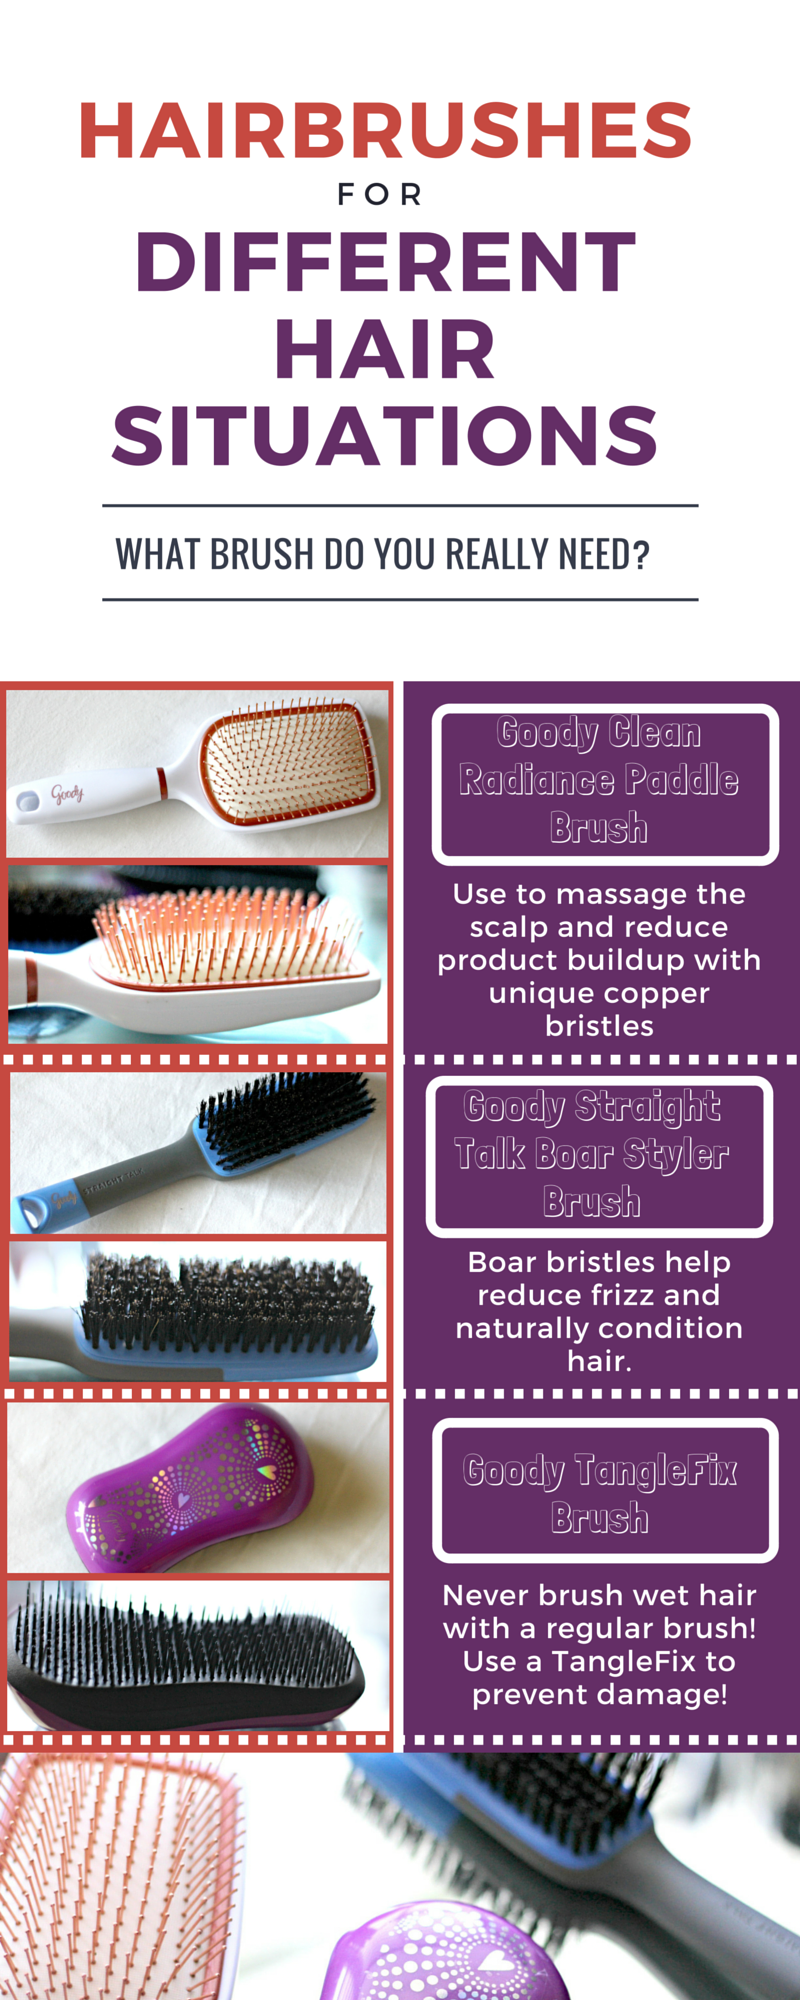 http://www.repressingthecrazy.com/wp-content/uploads/2016/03/hairbrushes.png